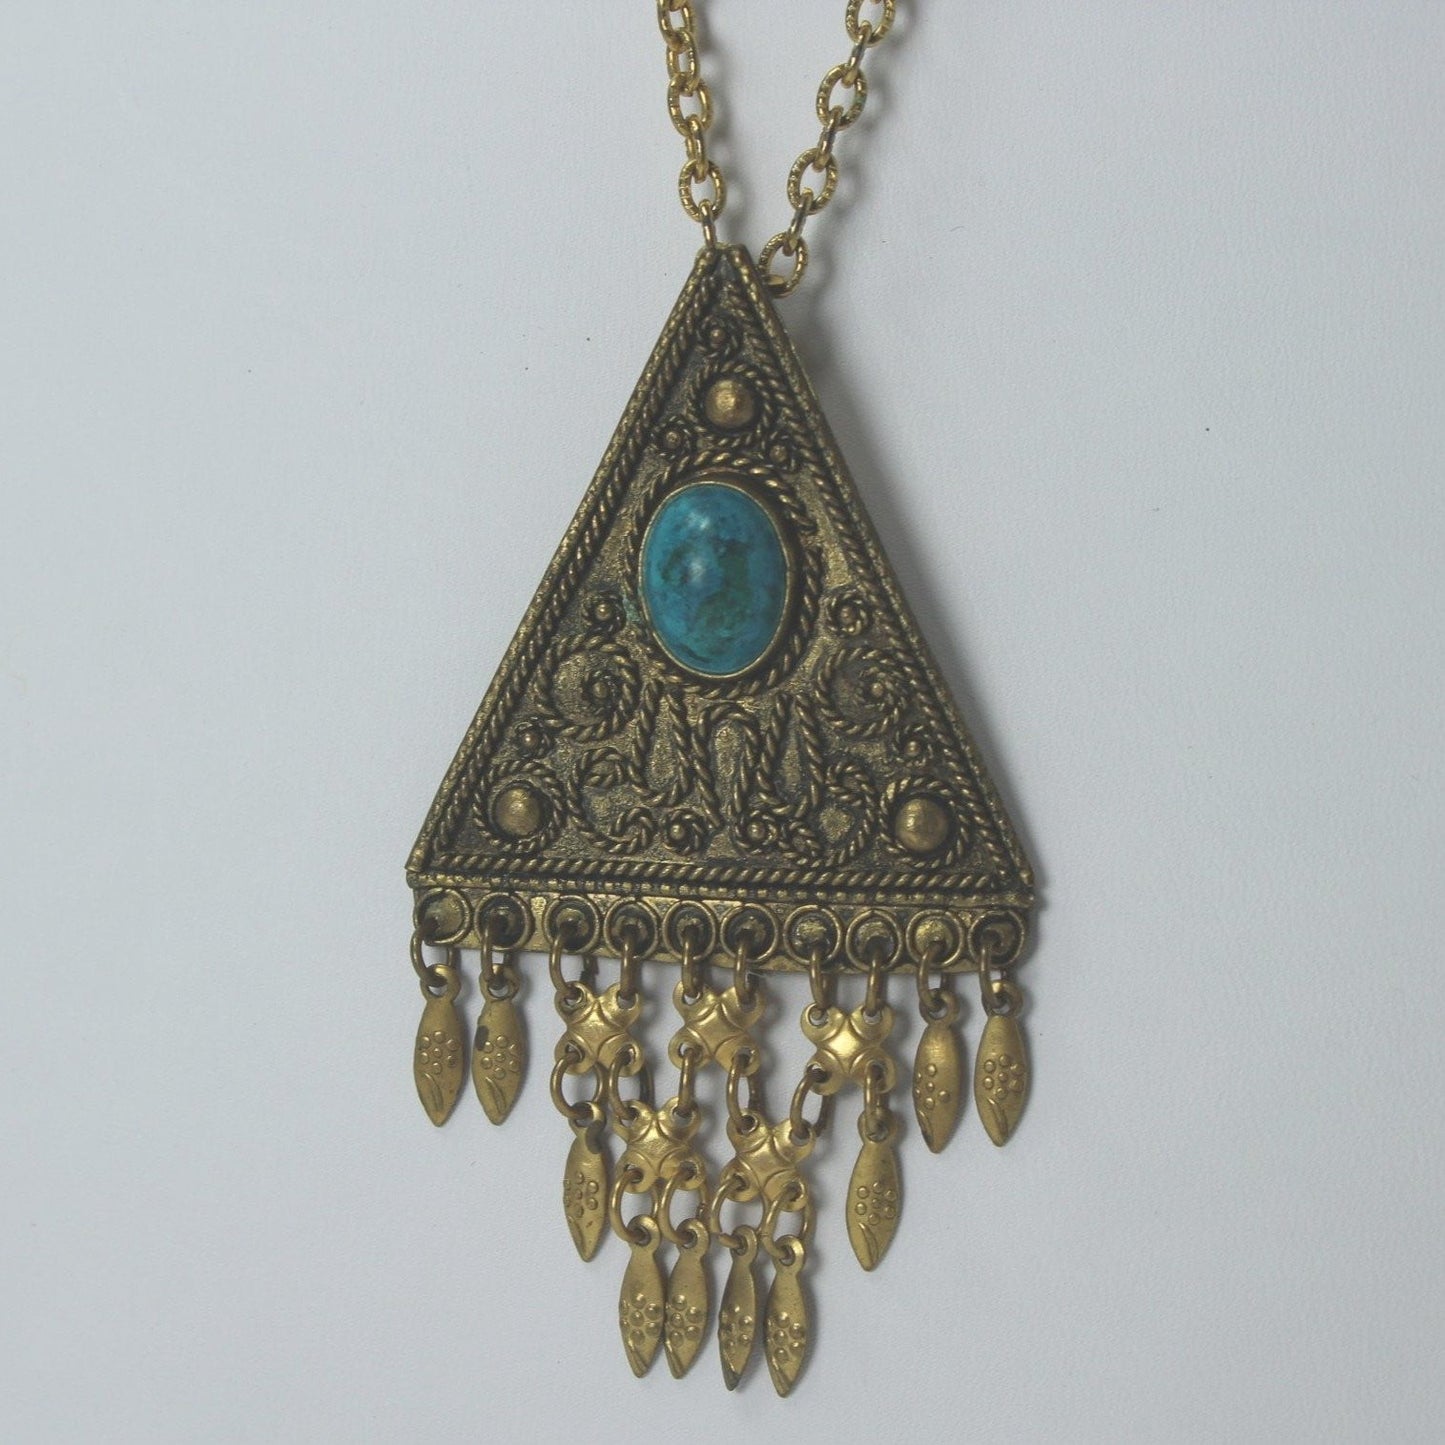 Necklace Israel Turquoise Color Stone 24" Long Necklace Triangular Pendant Filigree collectible